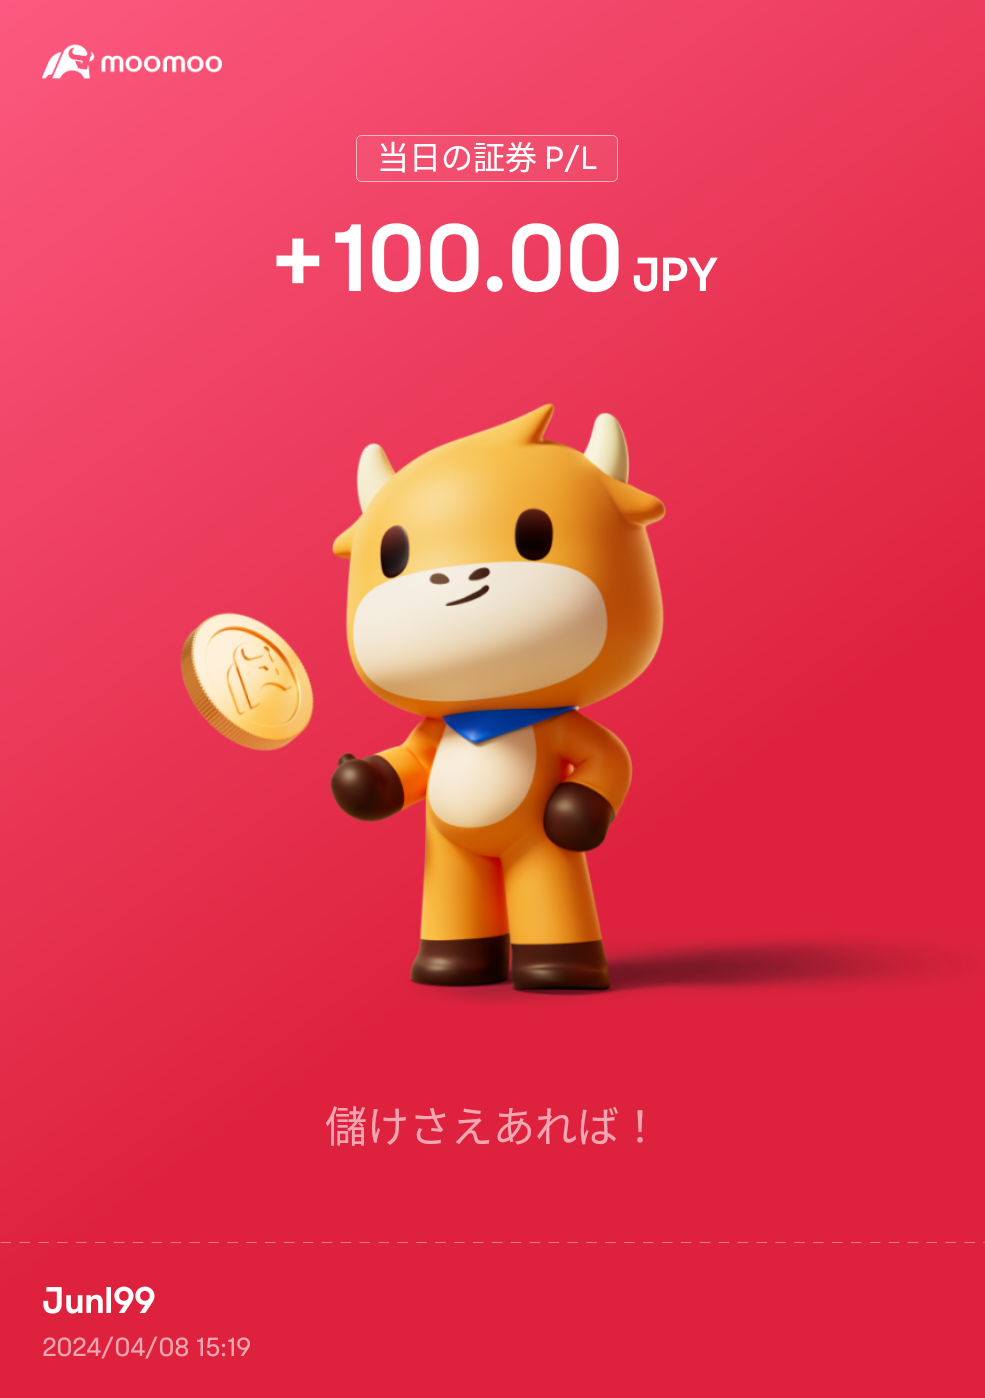 I used Moomoo Securities for the first time on the 3rd day of trading! I made a profit of about 1200 yen in a separate account on the first day, and lost money ...